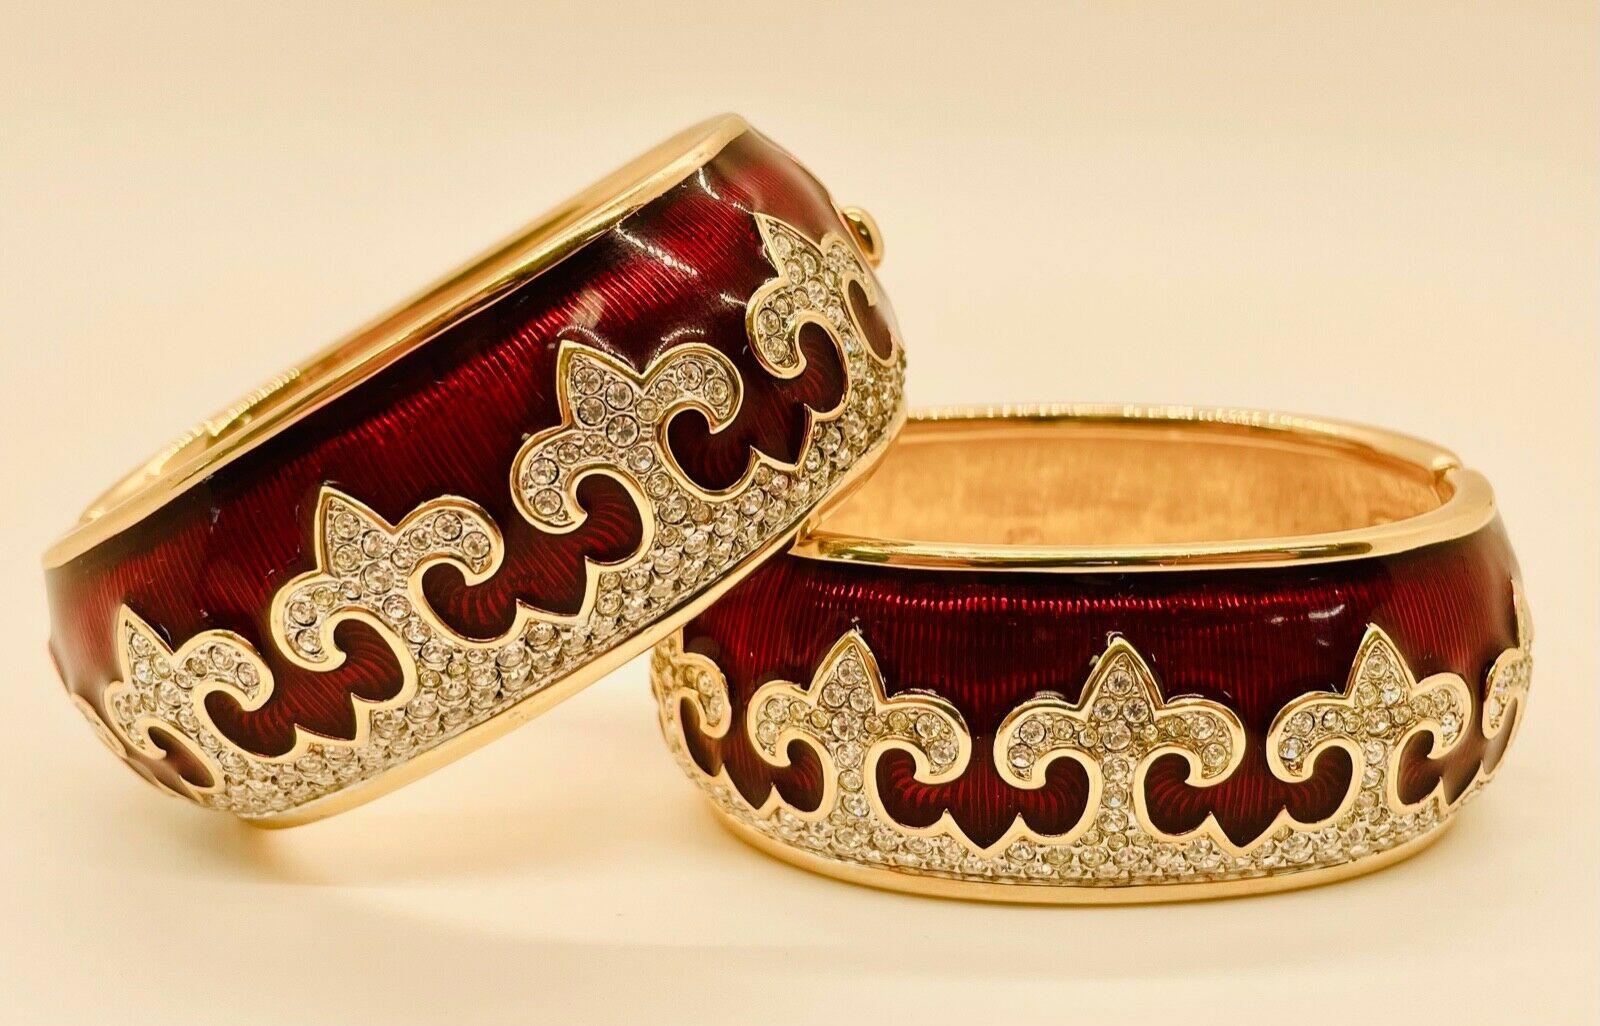 This exquisite pair of Swarovski cuff bracelets are crafted with Austrian crystals, featuring a deep red enamel-coated Guilloche background and a crystal Fleur de Lis decoration. Produced in the 1990s and stamped with the official Swarovski logo,